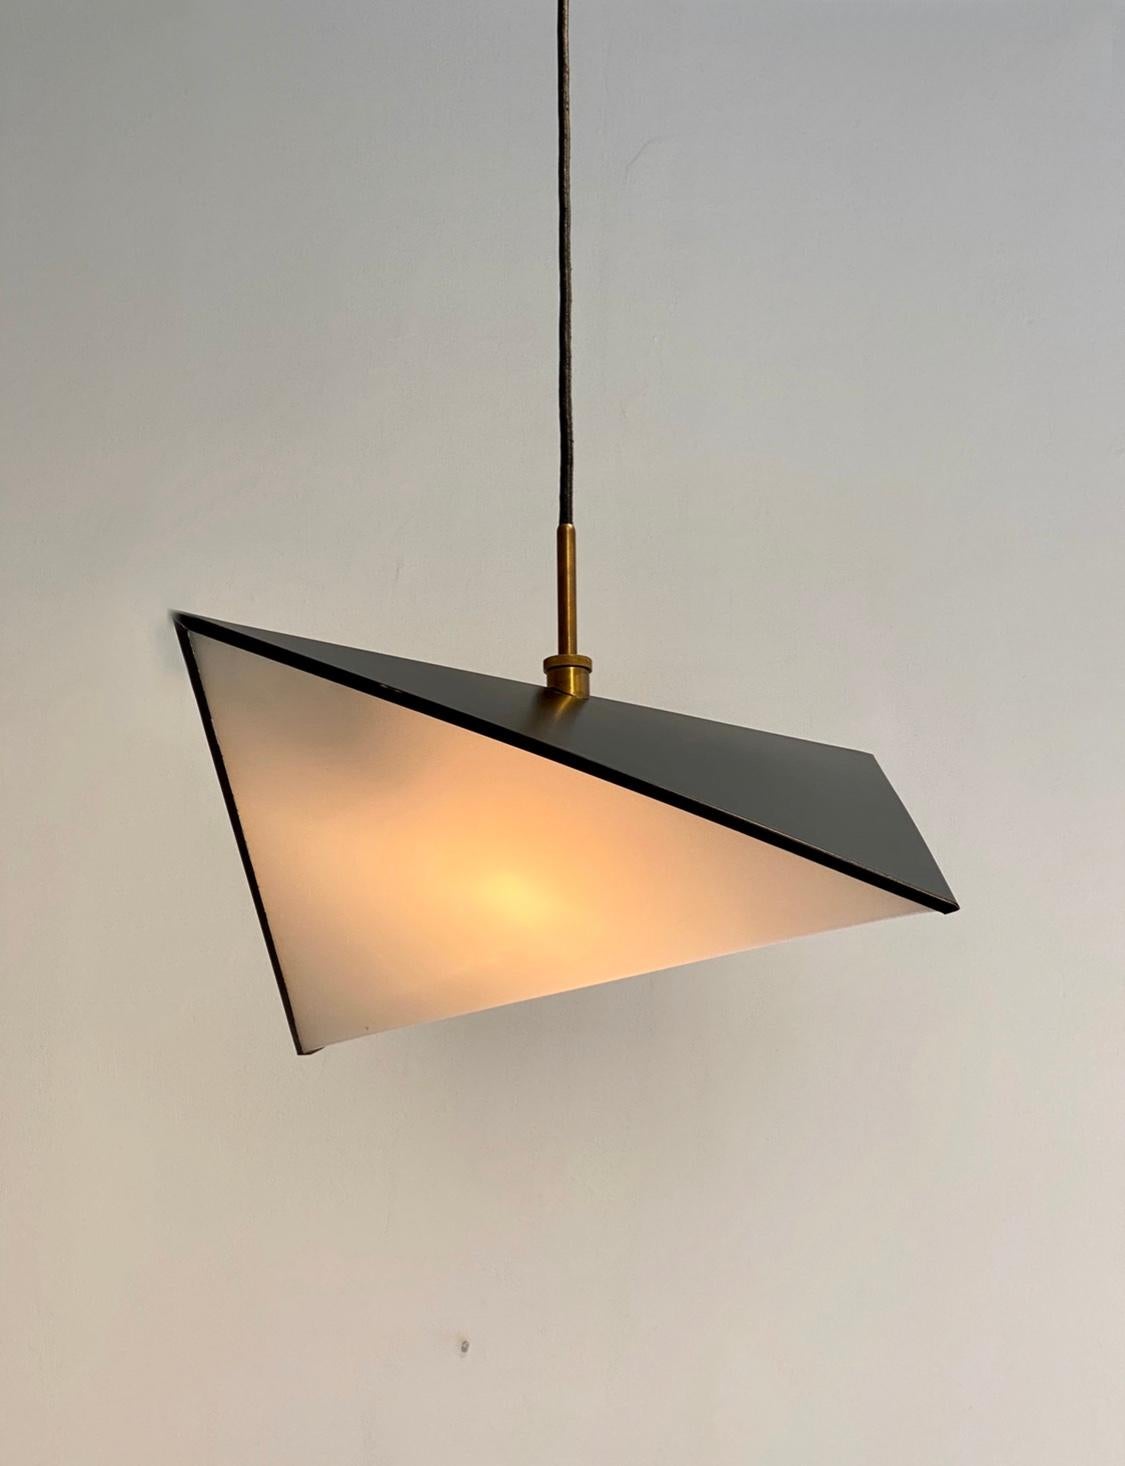 Prismatic form, ceiling light , designed by Svend Aage Sorensen in the 1960s.
Enameled metal, perspex and brass. 
All parts original, newly rewired. New square canopy.

This light can be viewed in my gallery in Chelsea, NY.